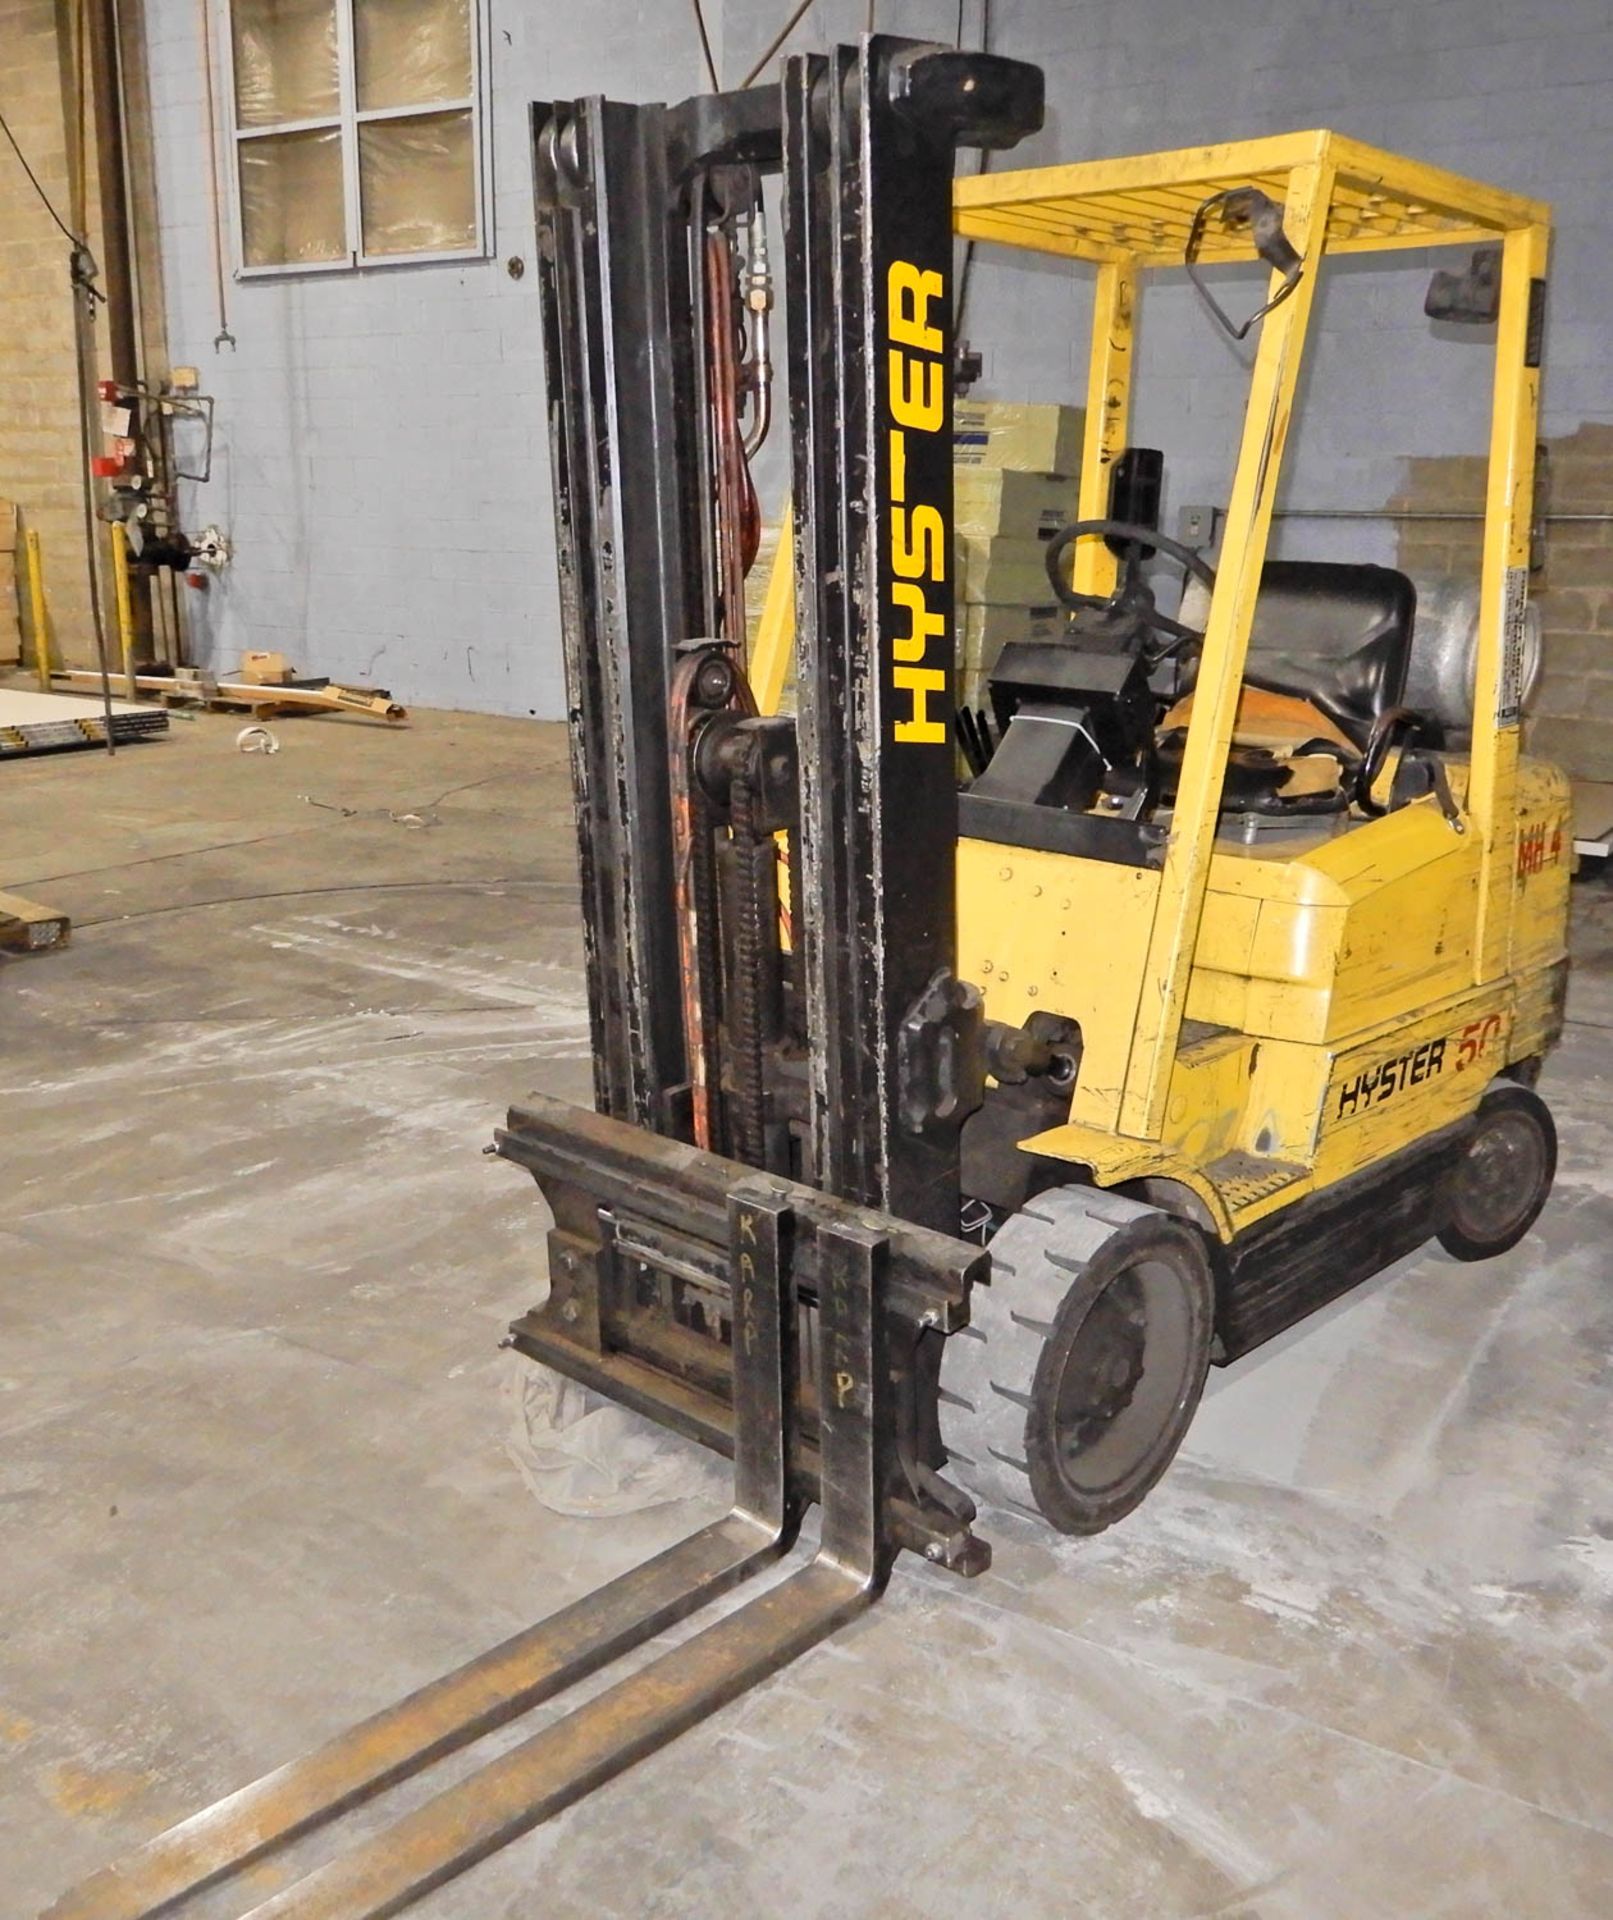 Hyster Model S50XM 4950# Capacity Forklift Truck - Image 2 of 5